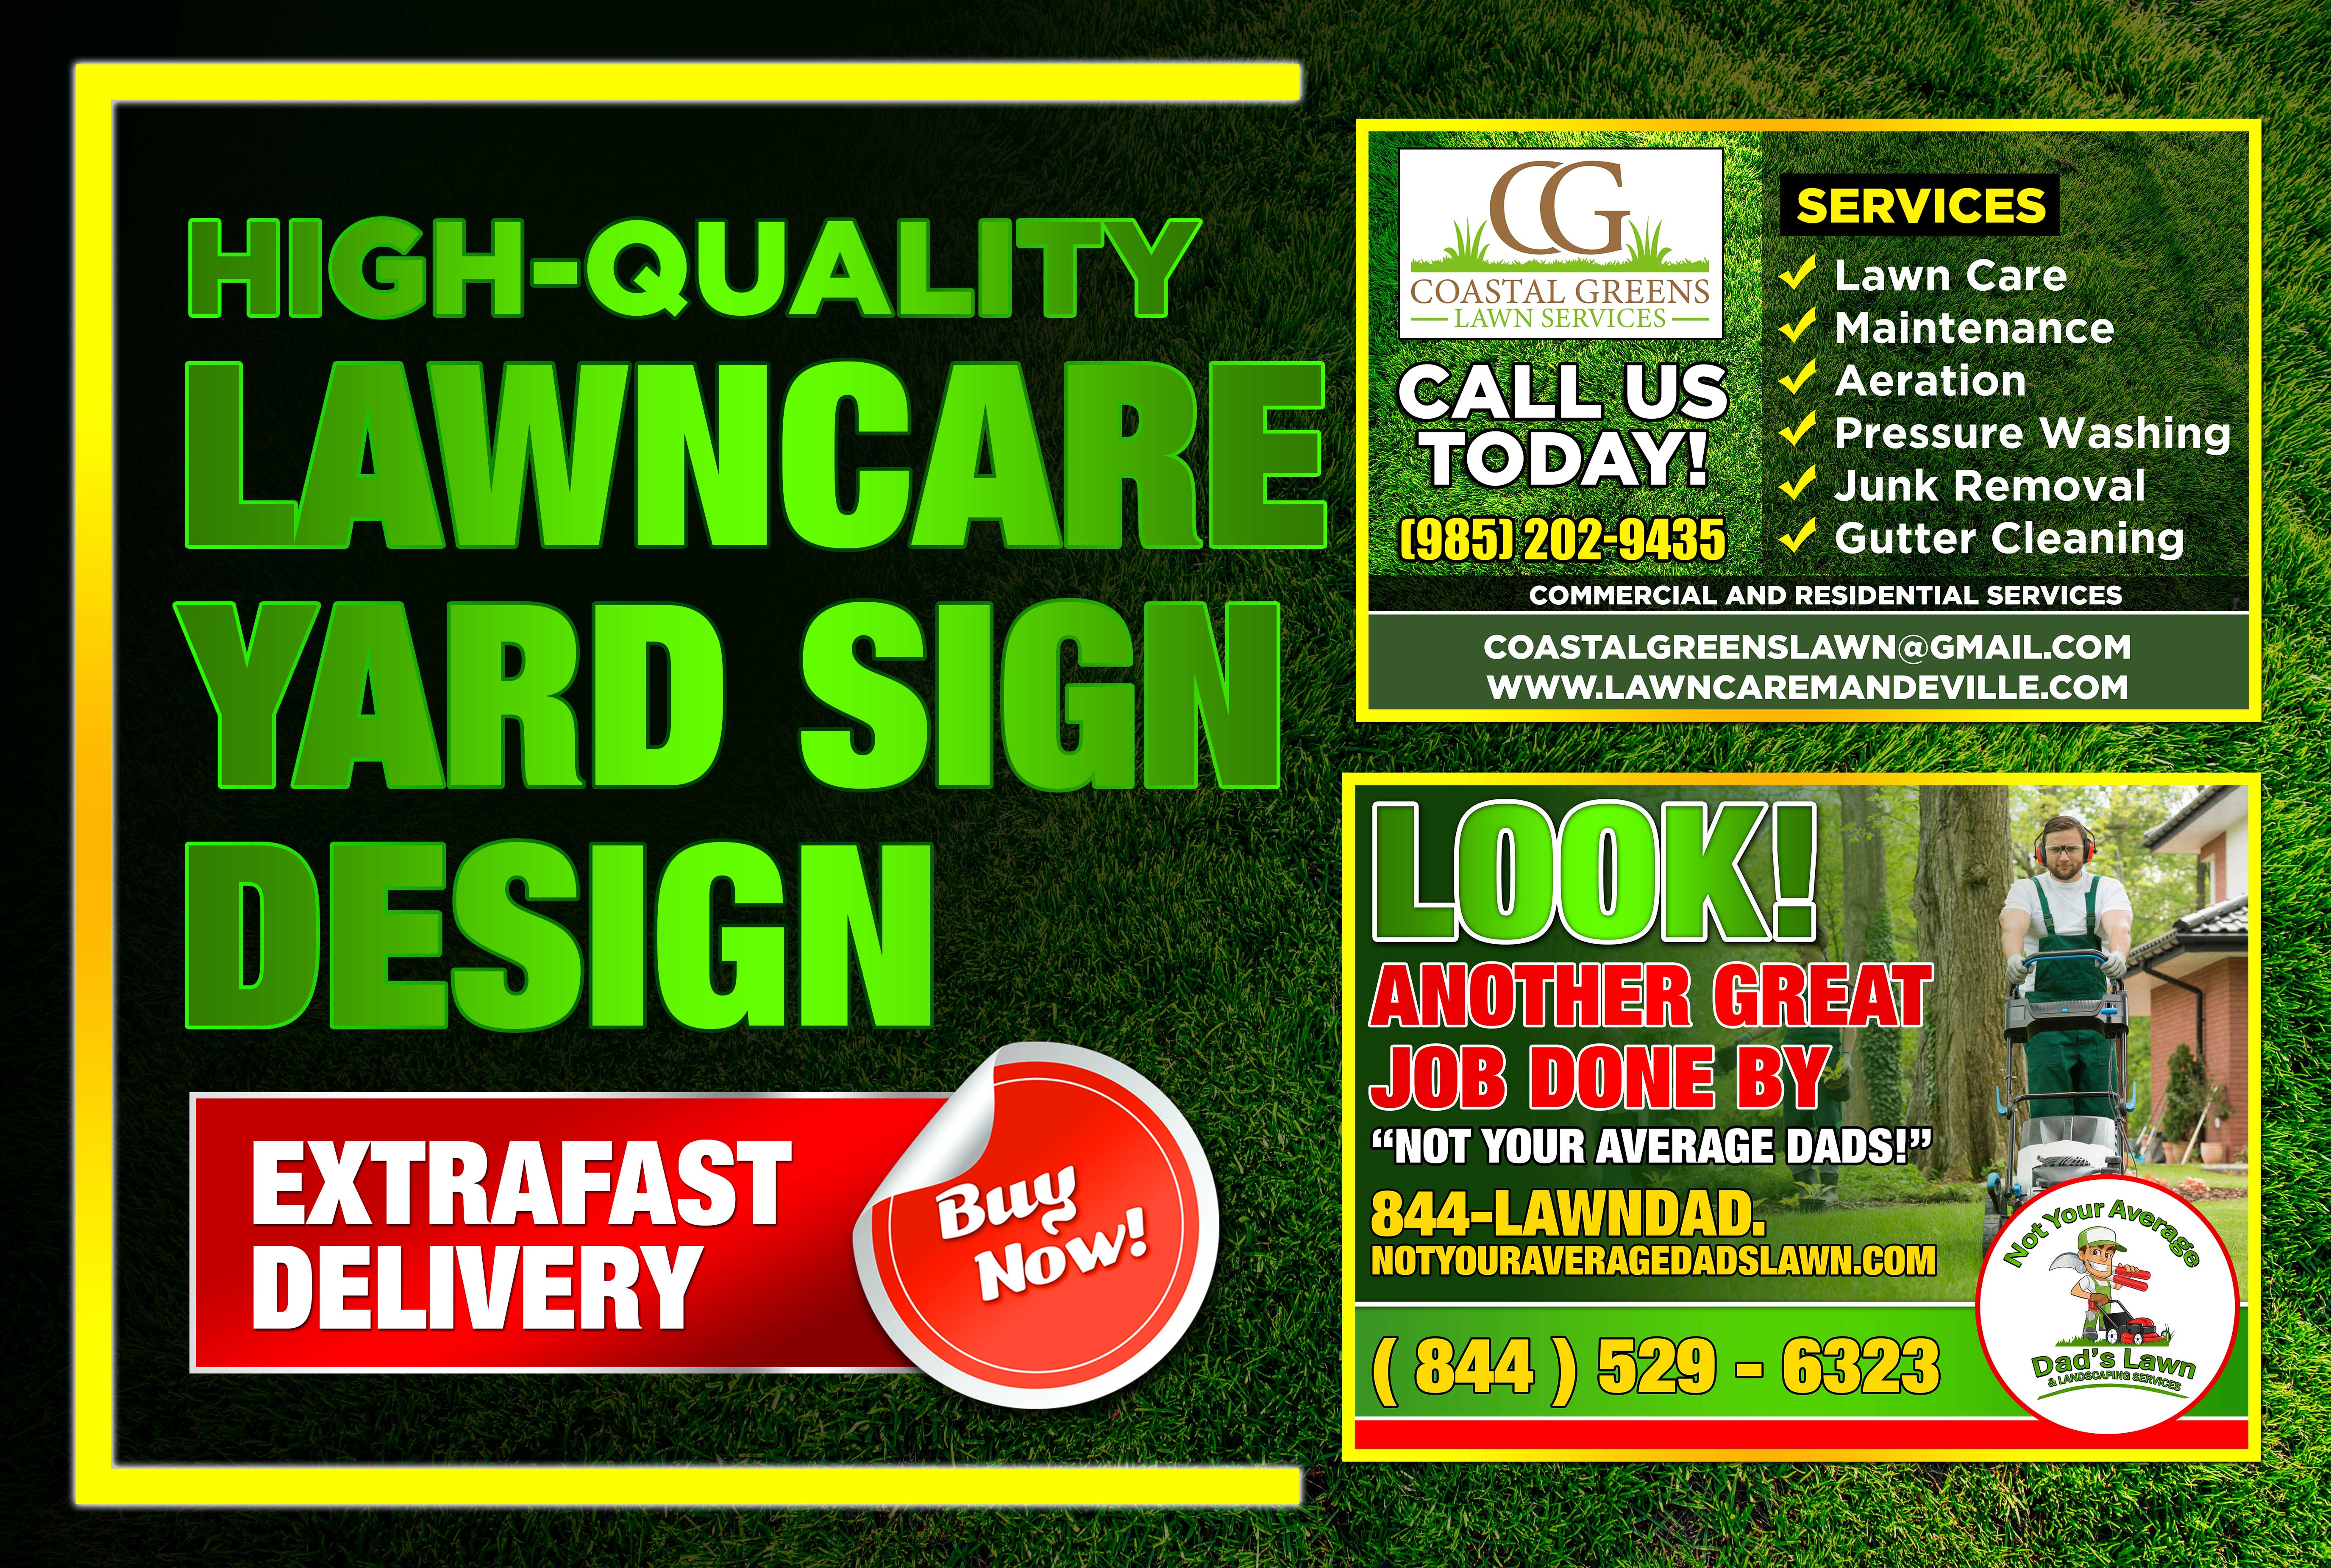 Do Lawn Care Yard Sign Design By, Landscaping Sign Designs